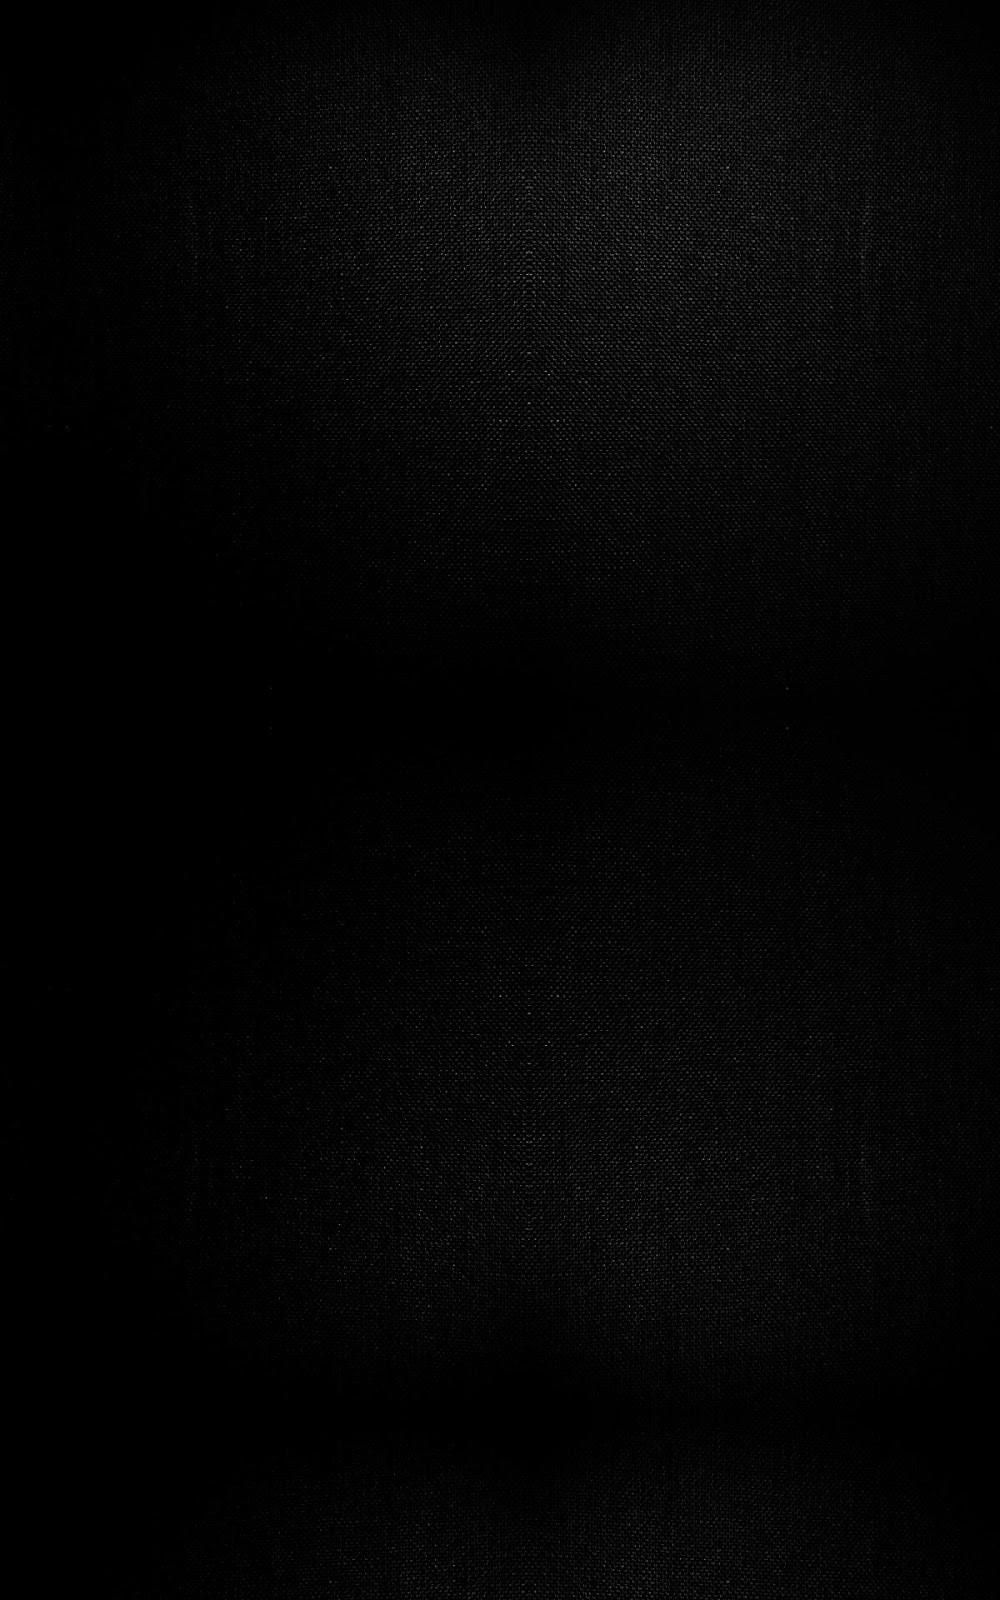 Simply iPhone Black Wallpapers - Wallpaper Cave